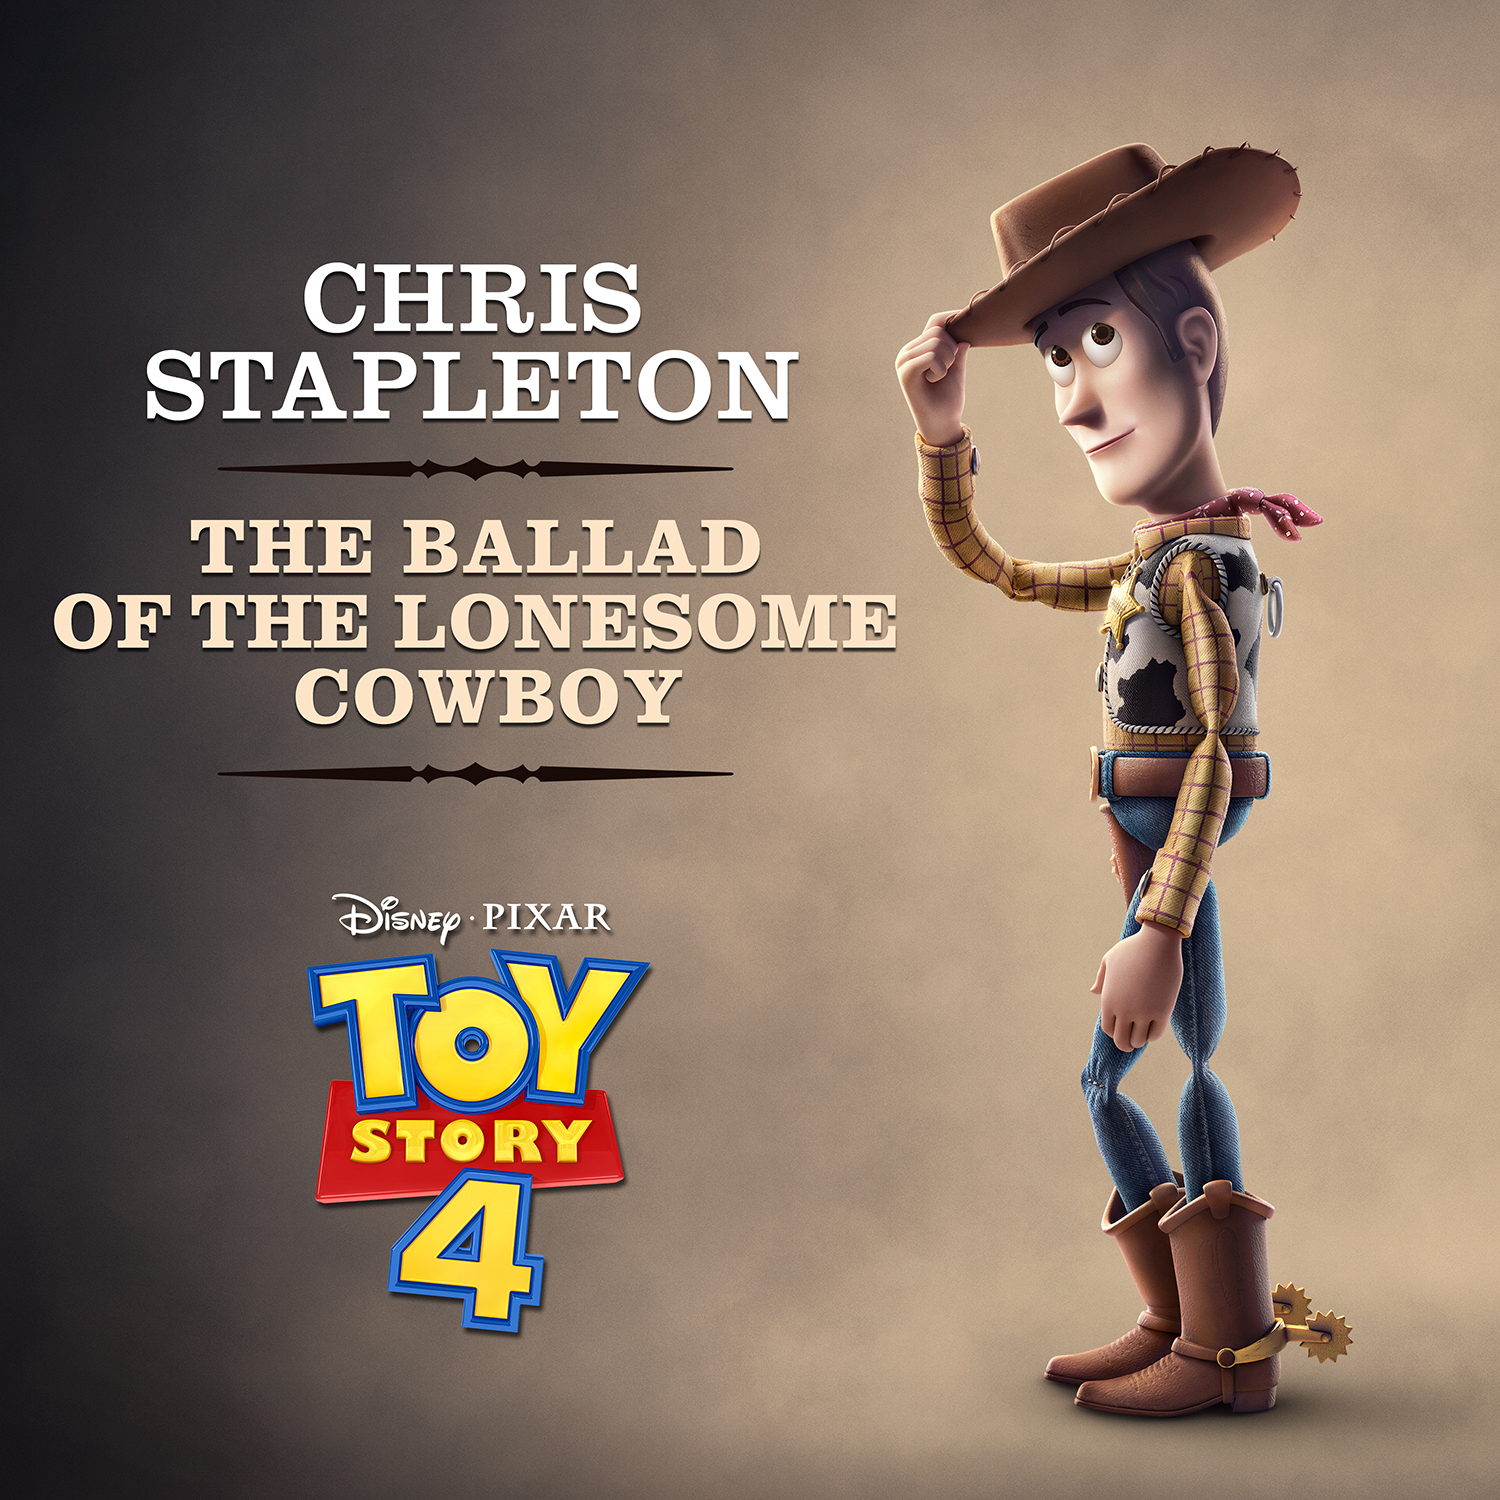 “Toy Story 4” Original Motion Picture Soundtrack to Feature Song Performed by Chris Stapleton